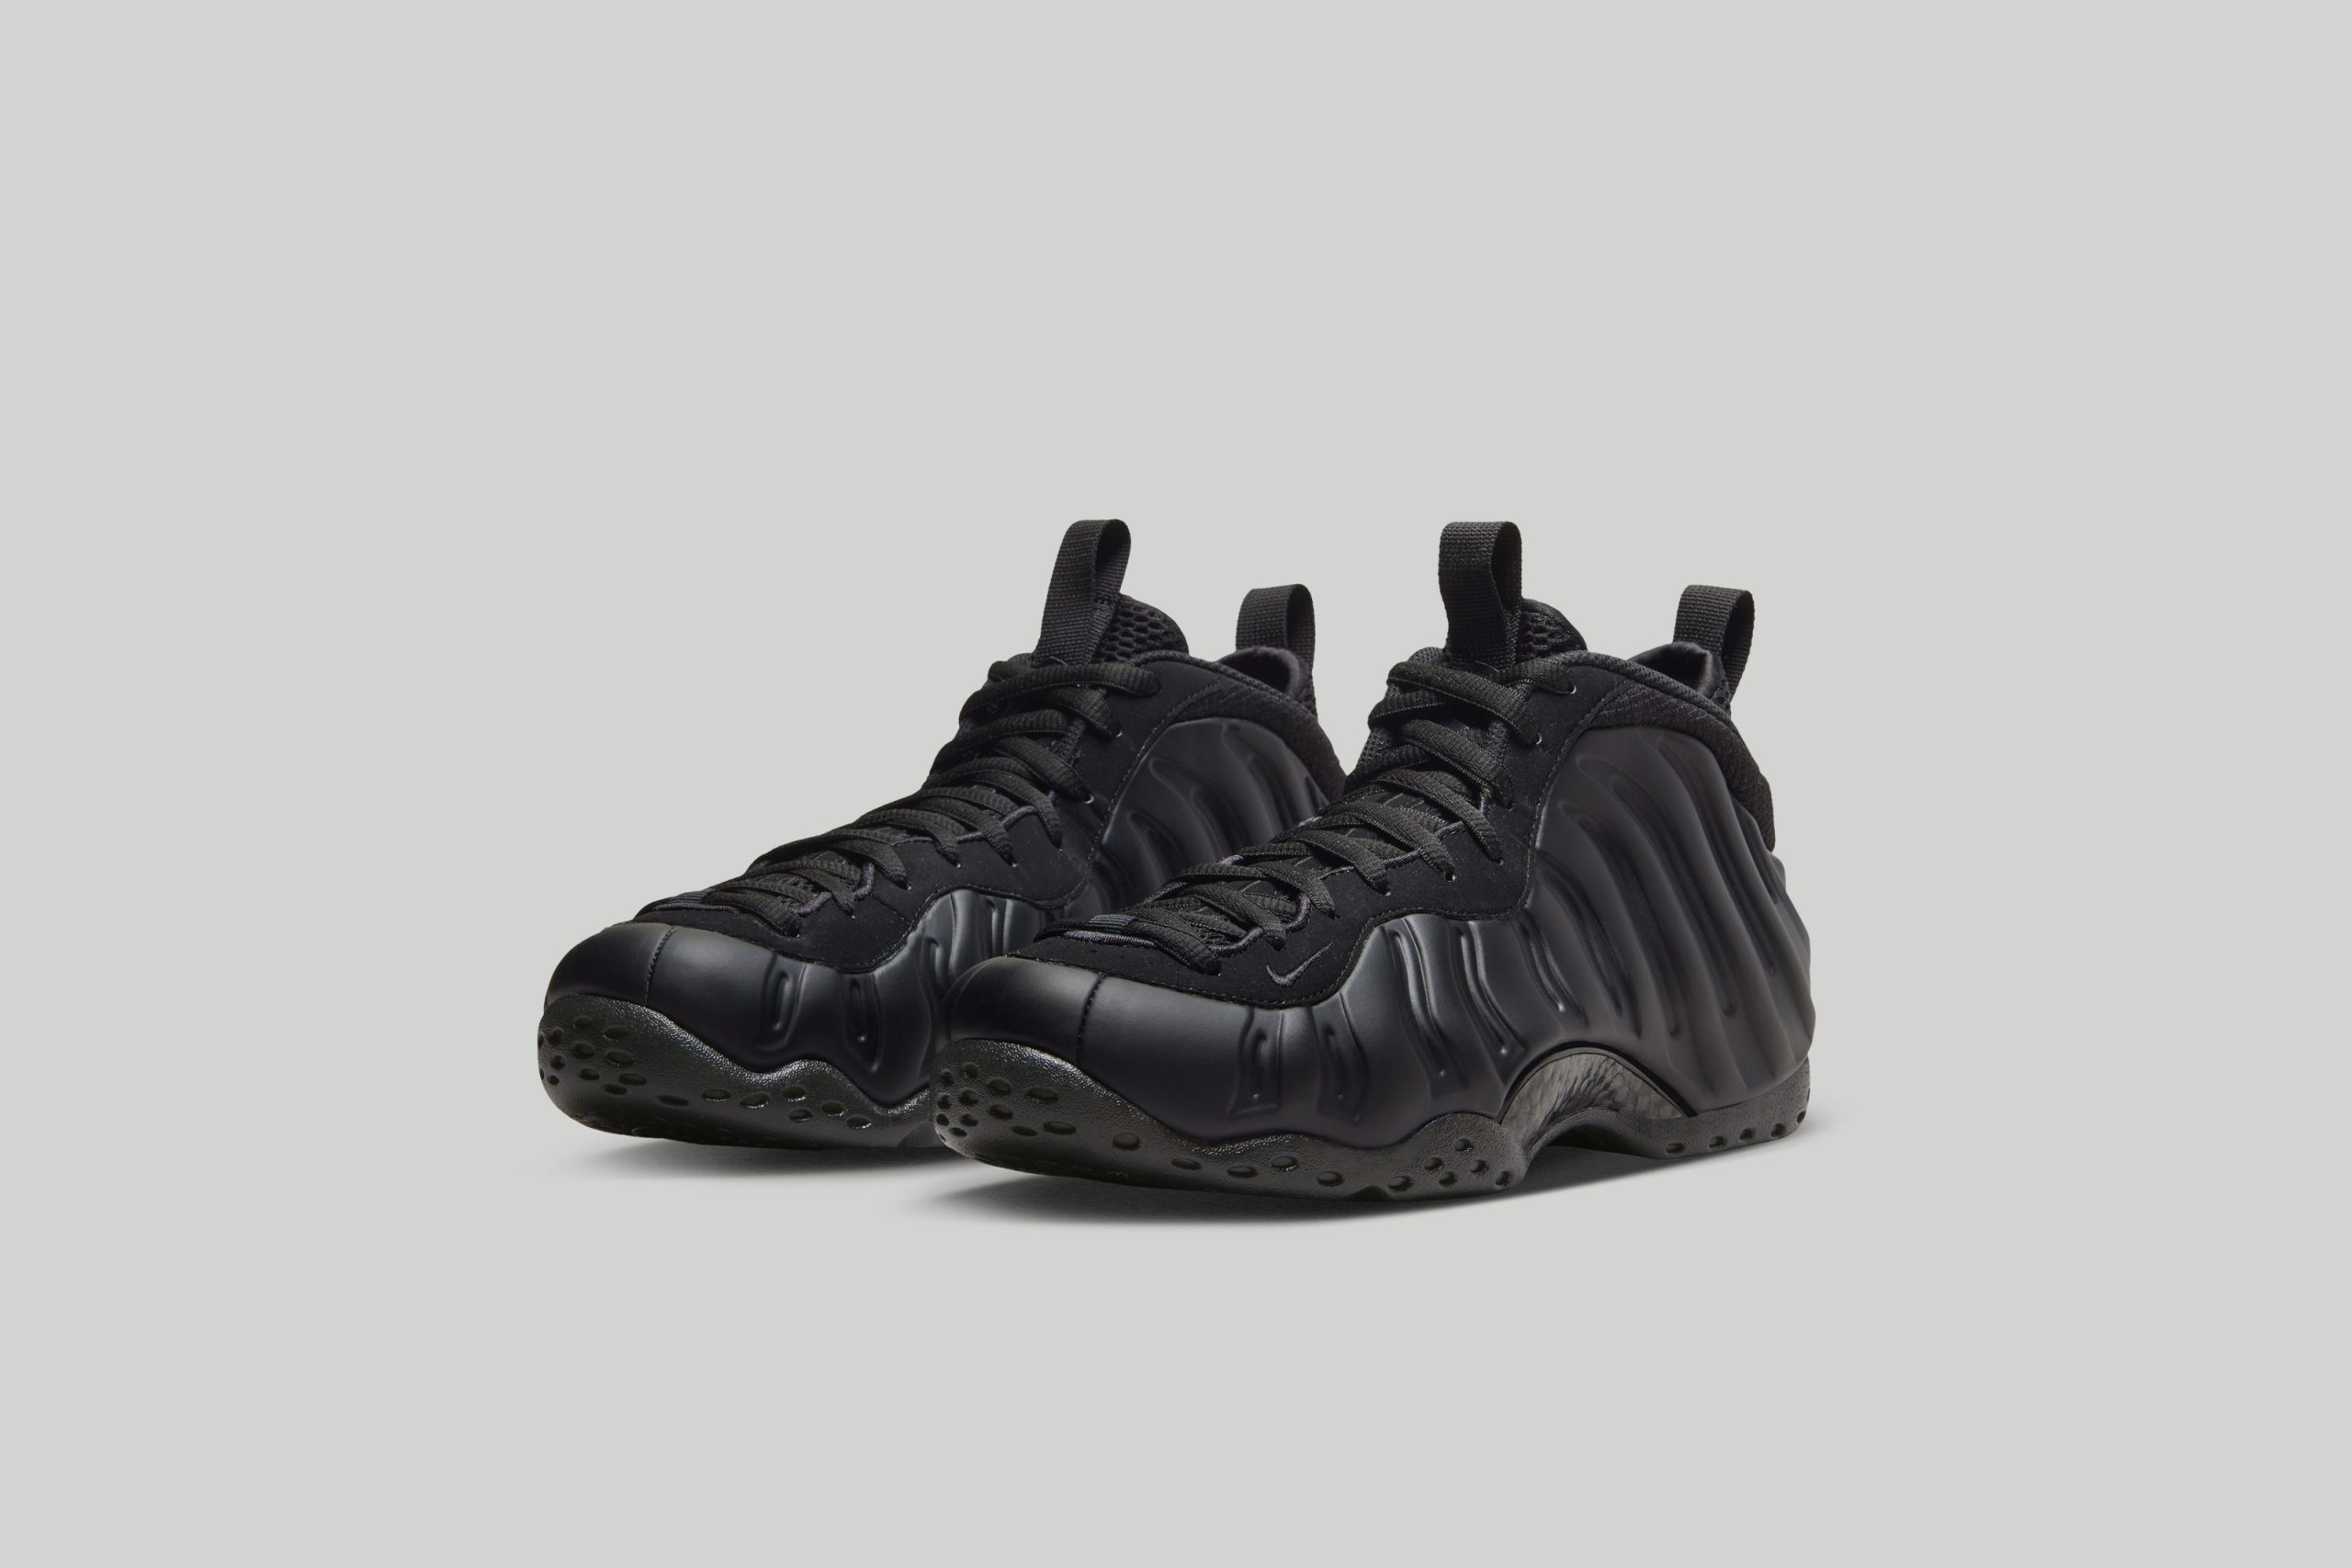 Nike Air Foamposite 1 "Anthracite"